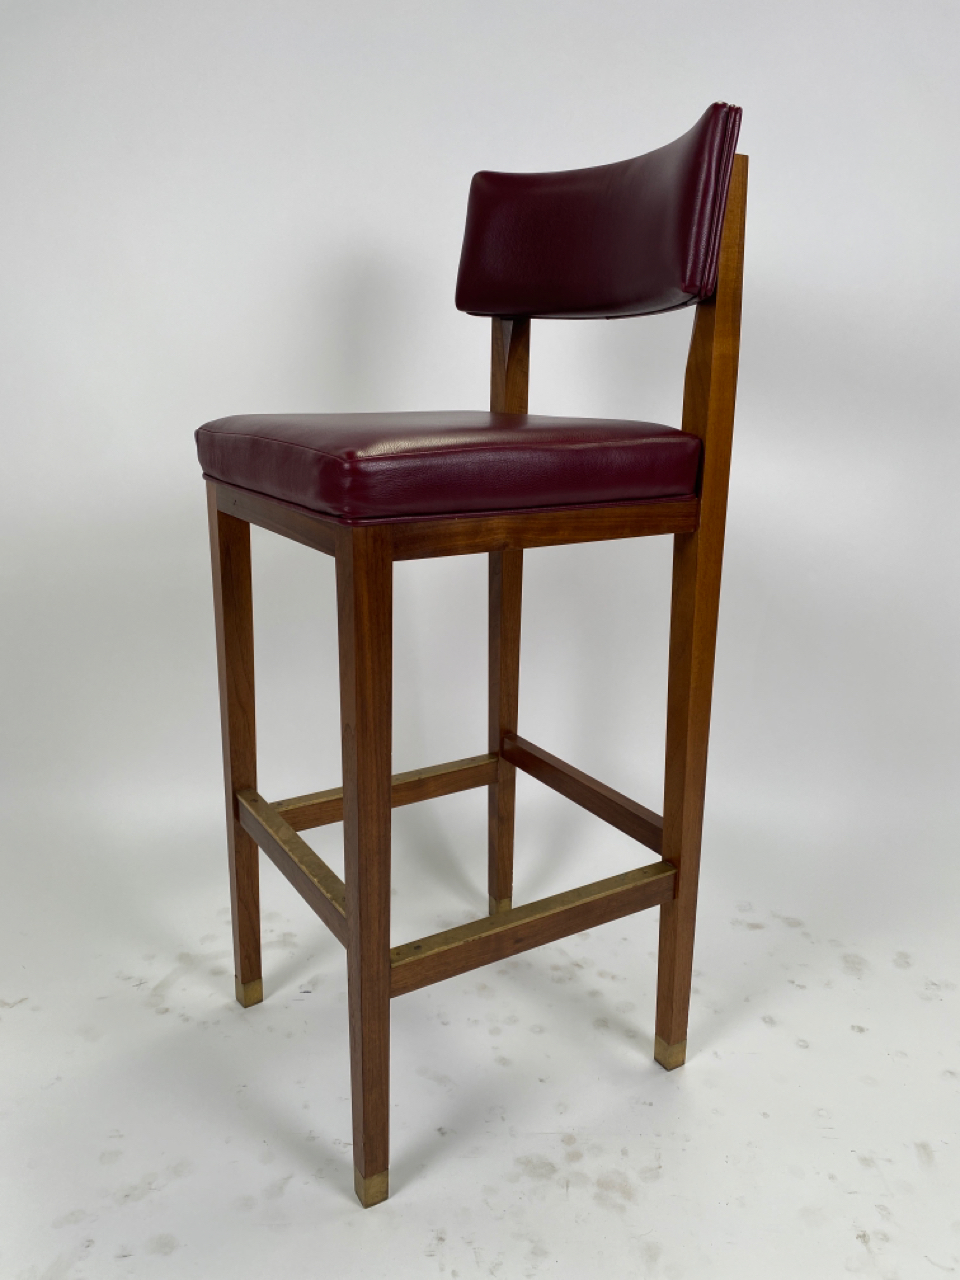 Trio of Leather Bar Stools - Image 5 of 6